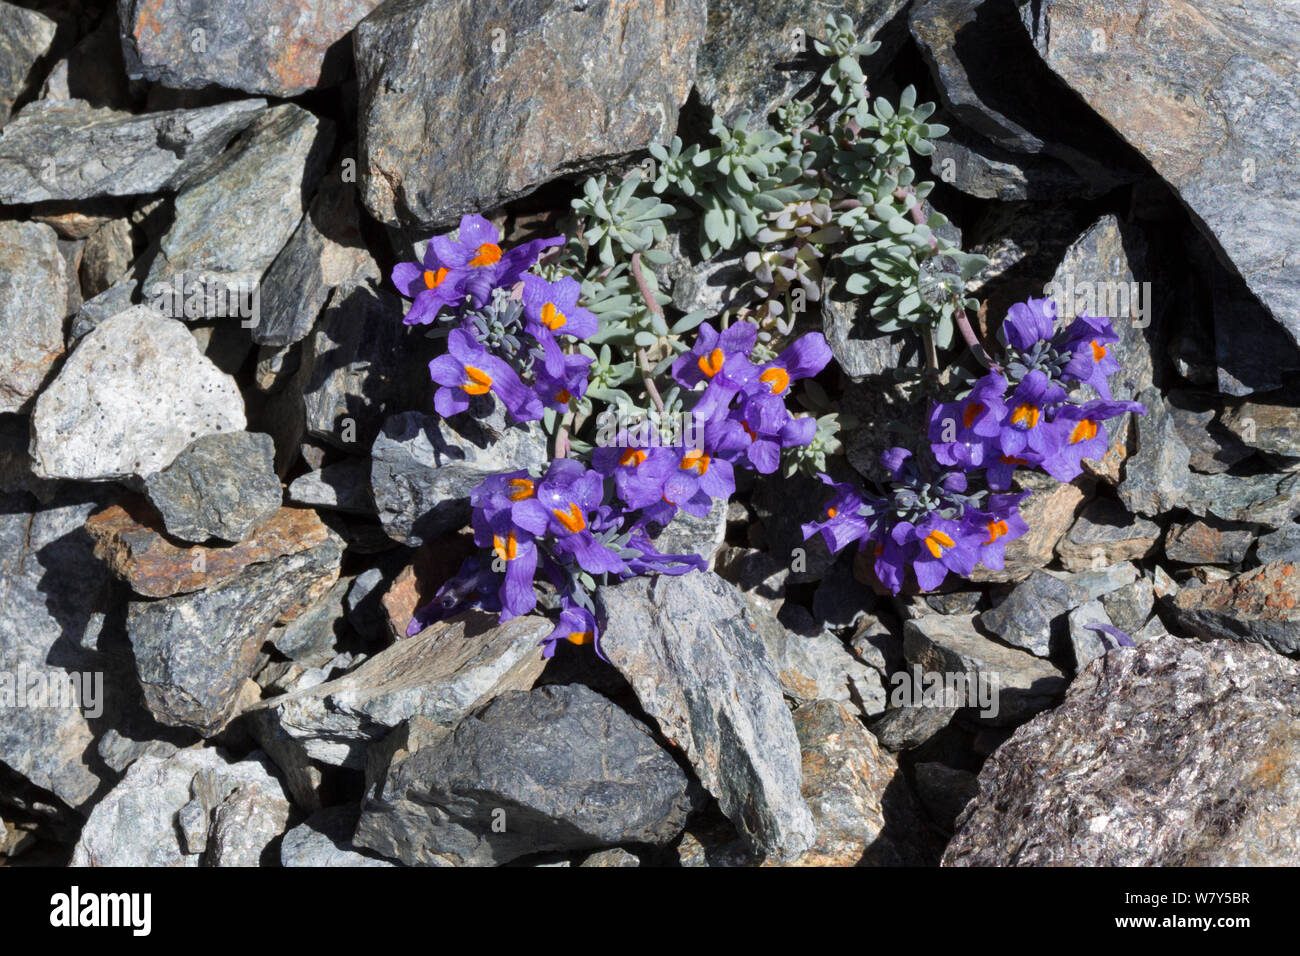 Alpine toadflax (Linaria alpina) growing in scree slope on mountainside. Nordtirol, Austrian Alps, July. Stock Photo